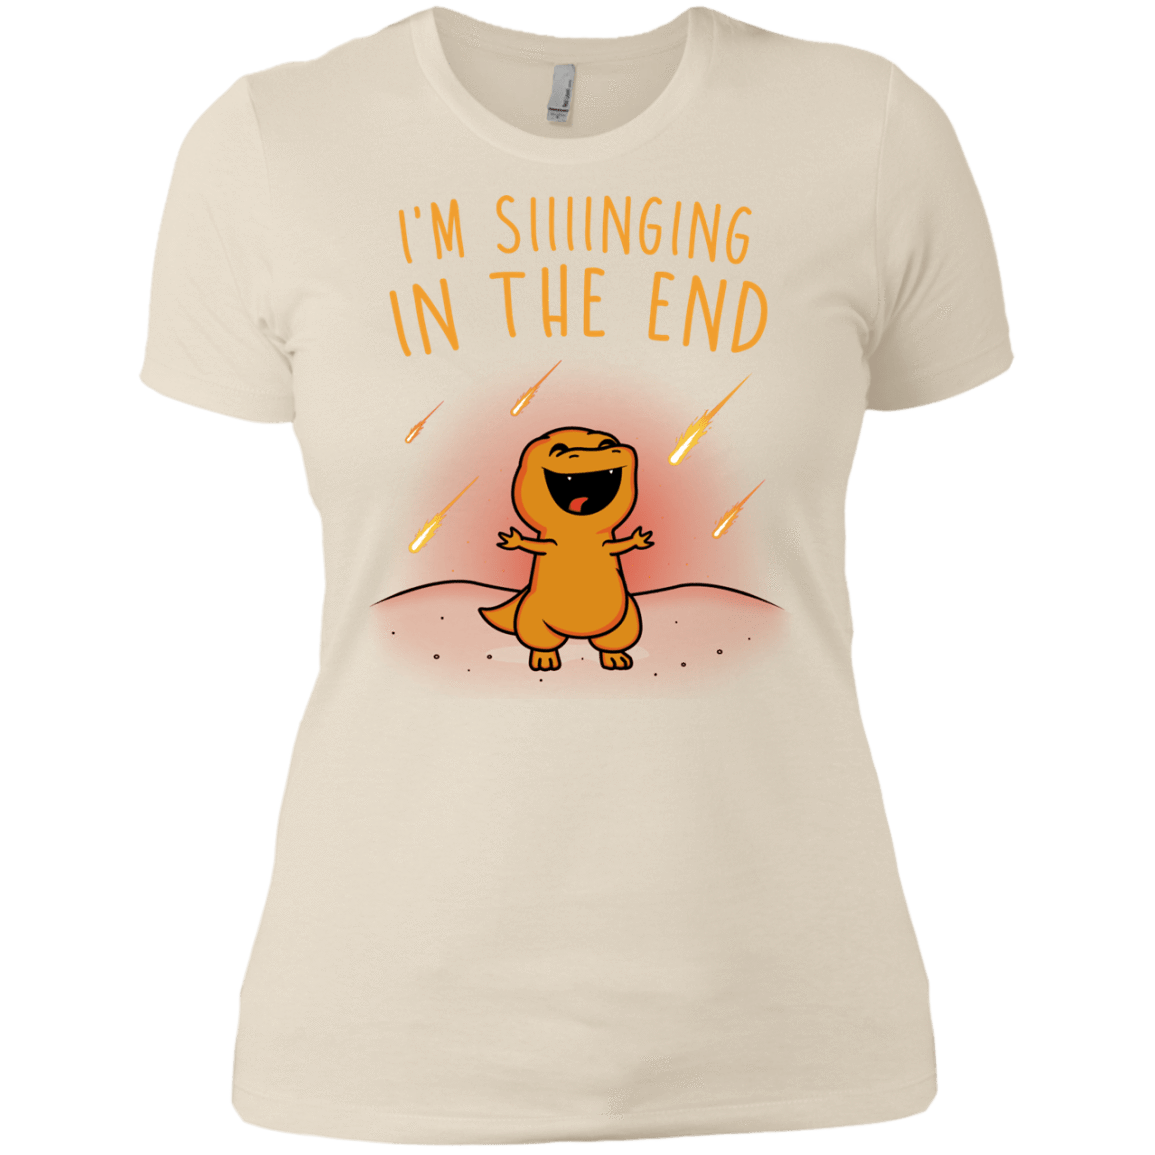 T-Shirts Ivory/ / X-Small Singing in the End Women's Premium T-Shirt